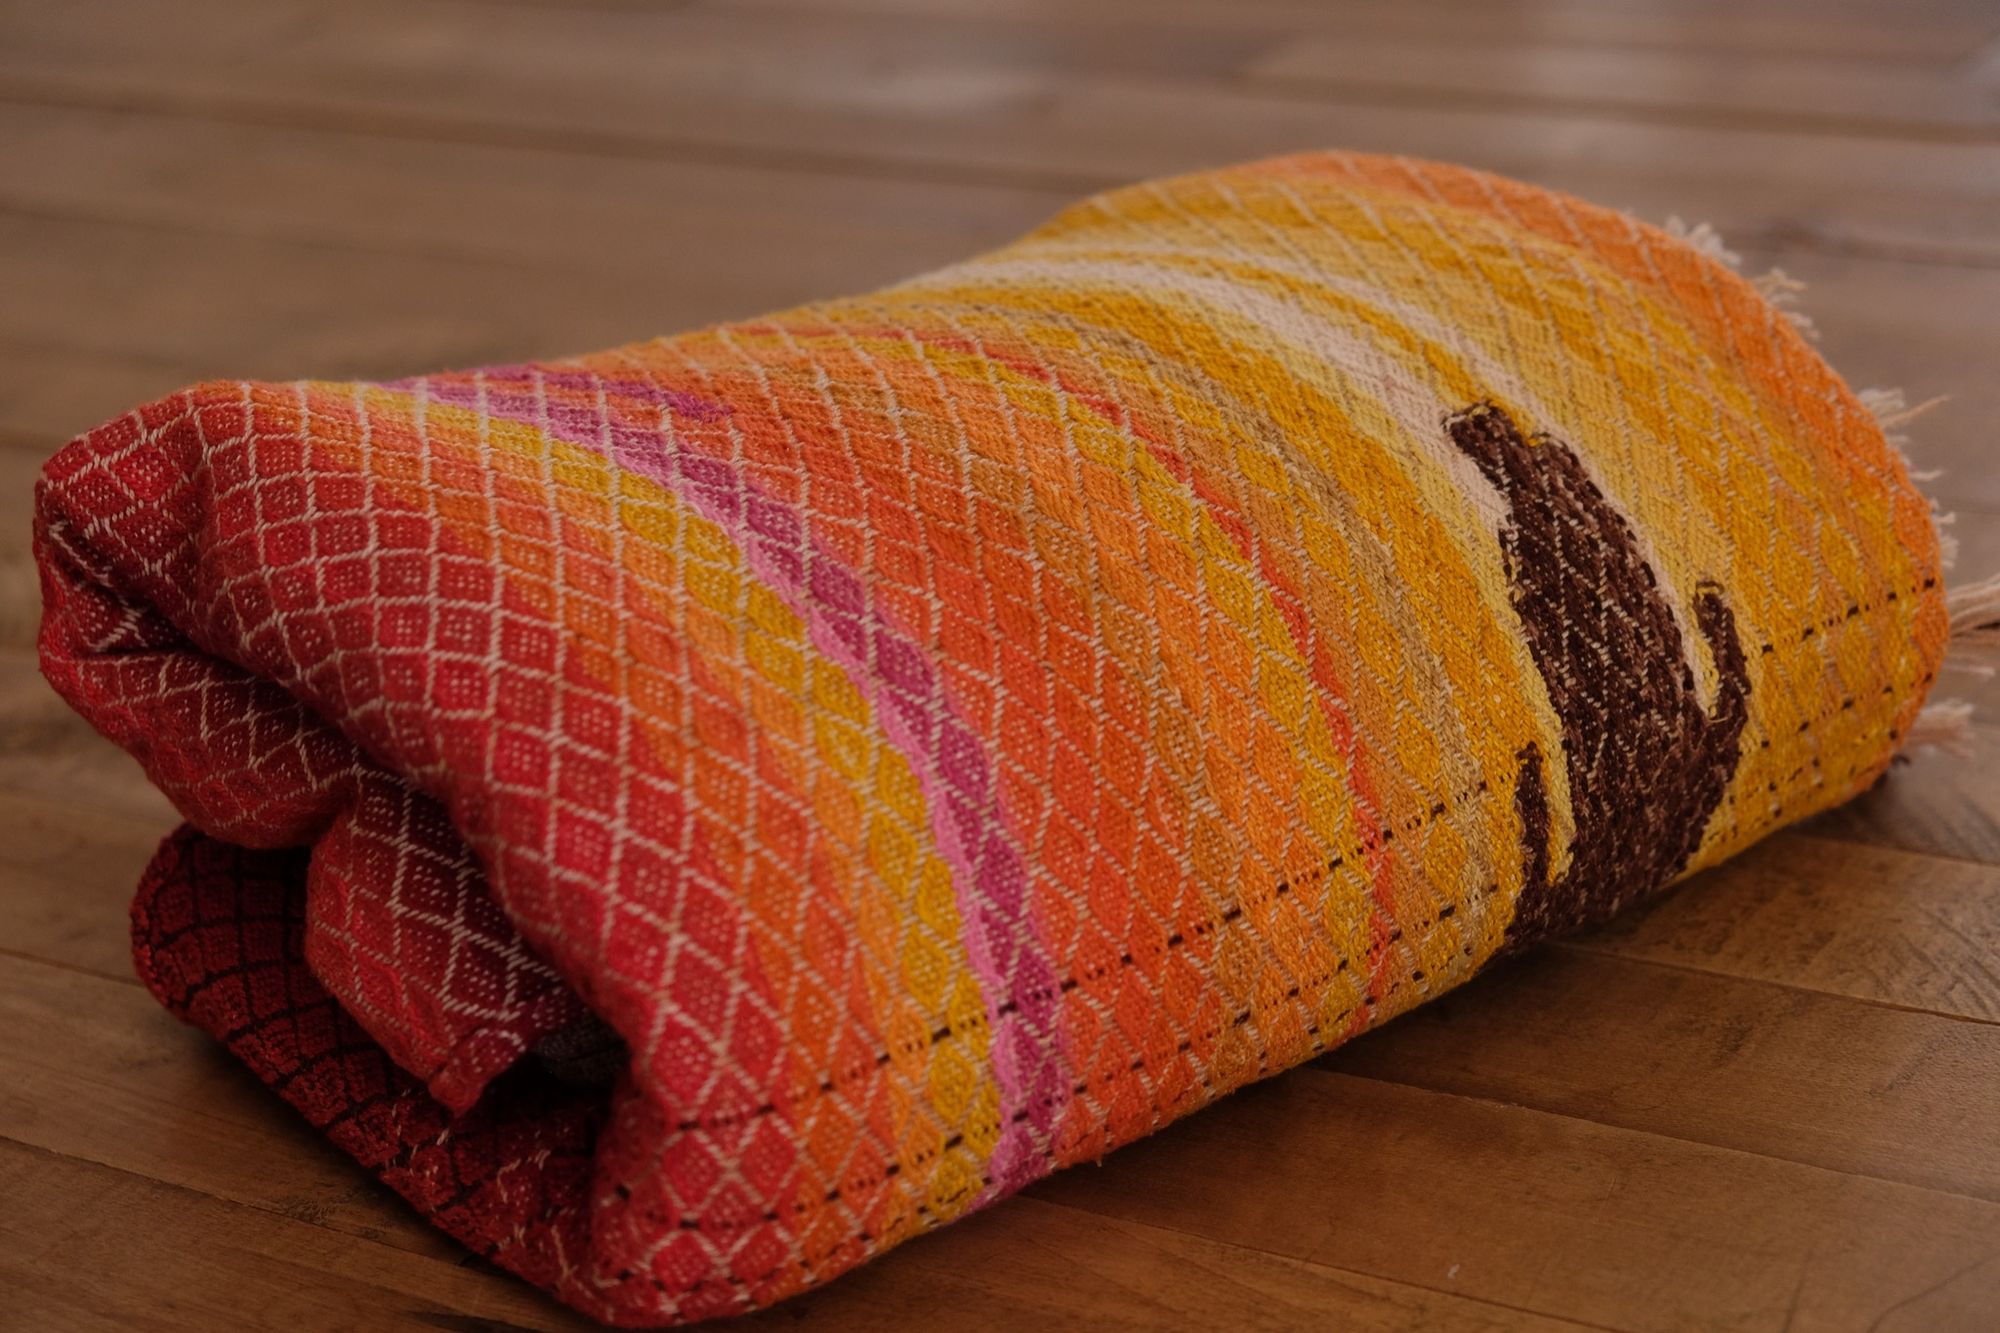 folded, and sitting on a wooden floor Handwoven, highly textures Diamond pattern fabric in every color of the rainbow, with natural browns and tans